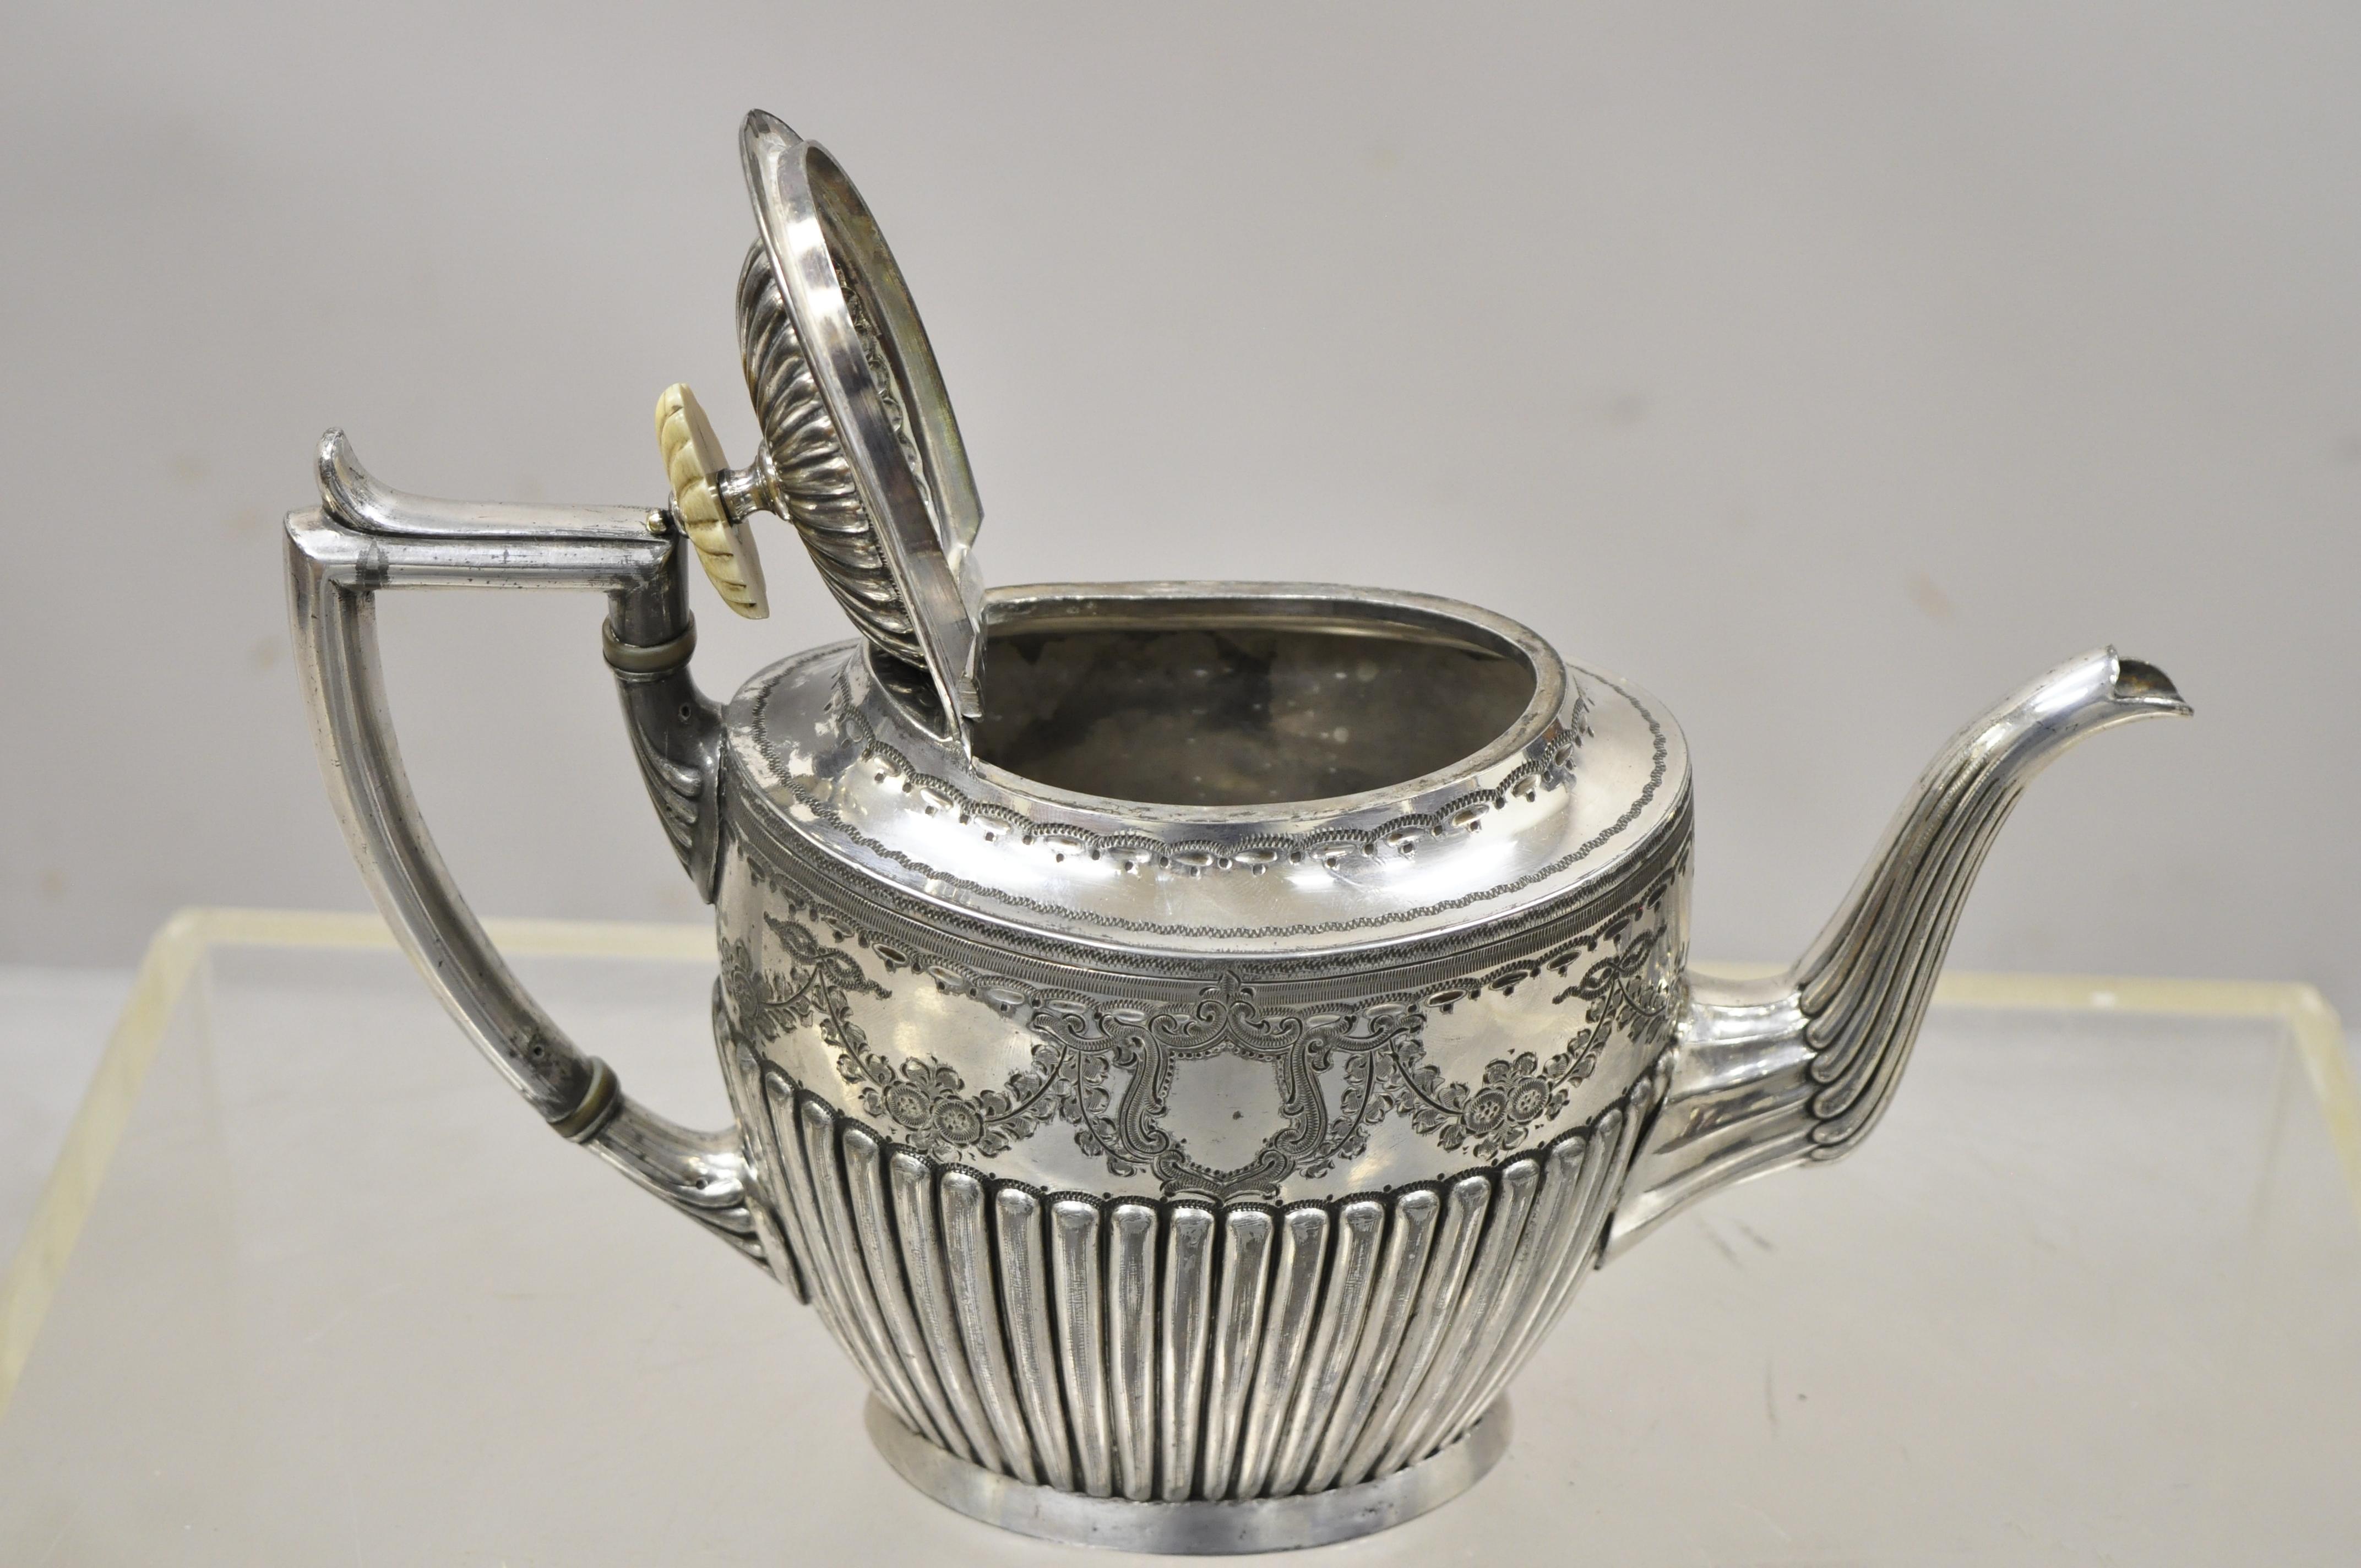 Antique William Briggs & Co Sheffield Edwardian Victorian silver plated tea coffee pot (A). Item features bone handle to lid, floral drape and shield pattern, chased form, marked to bottom 